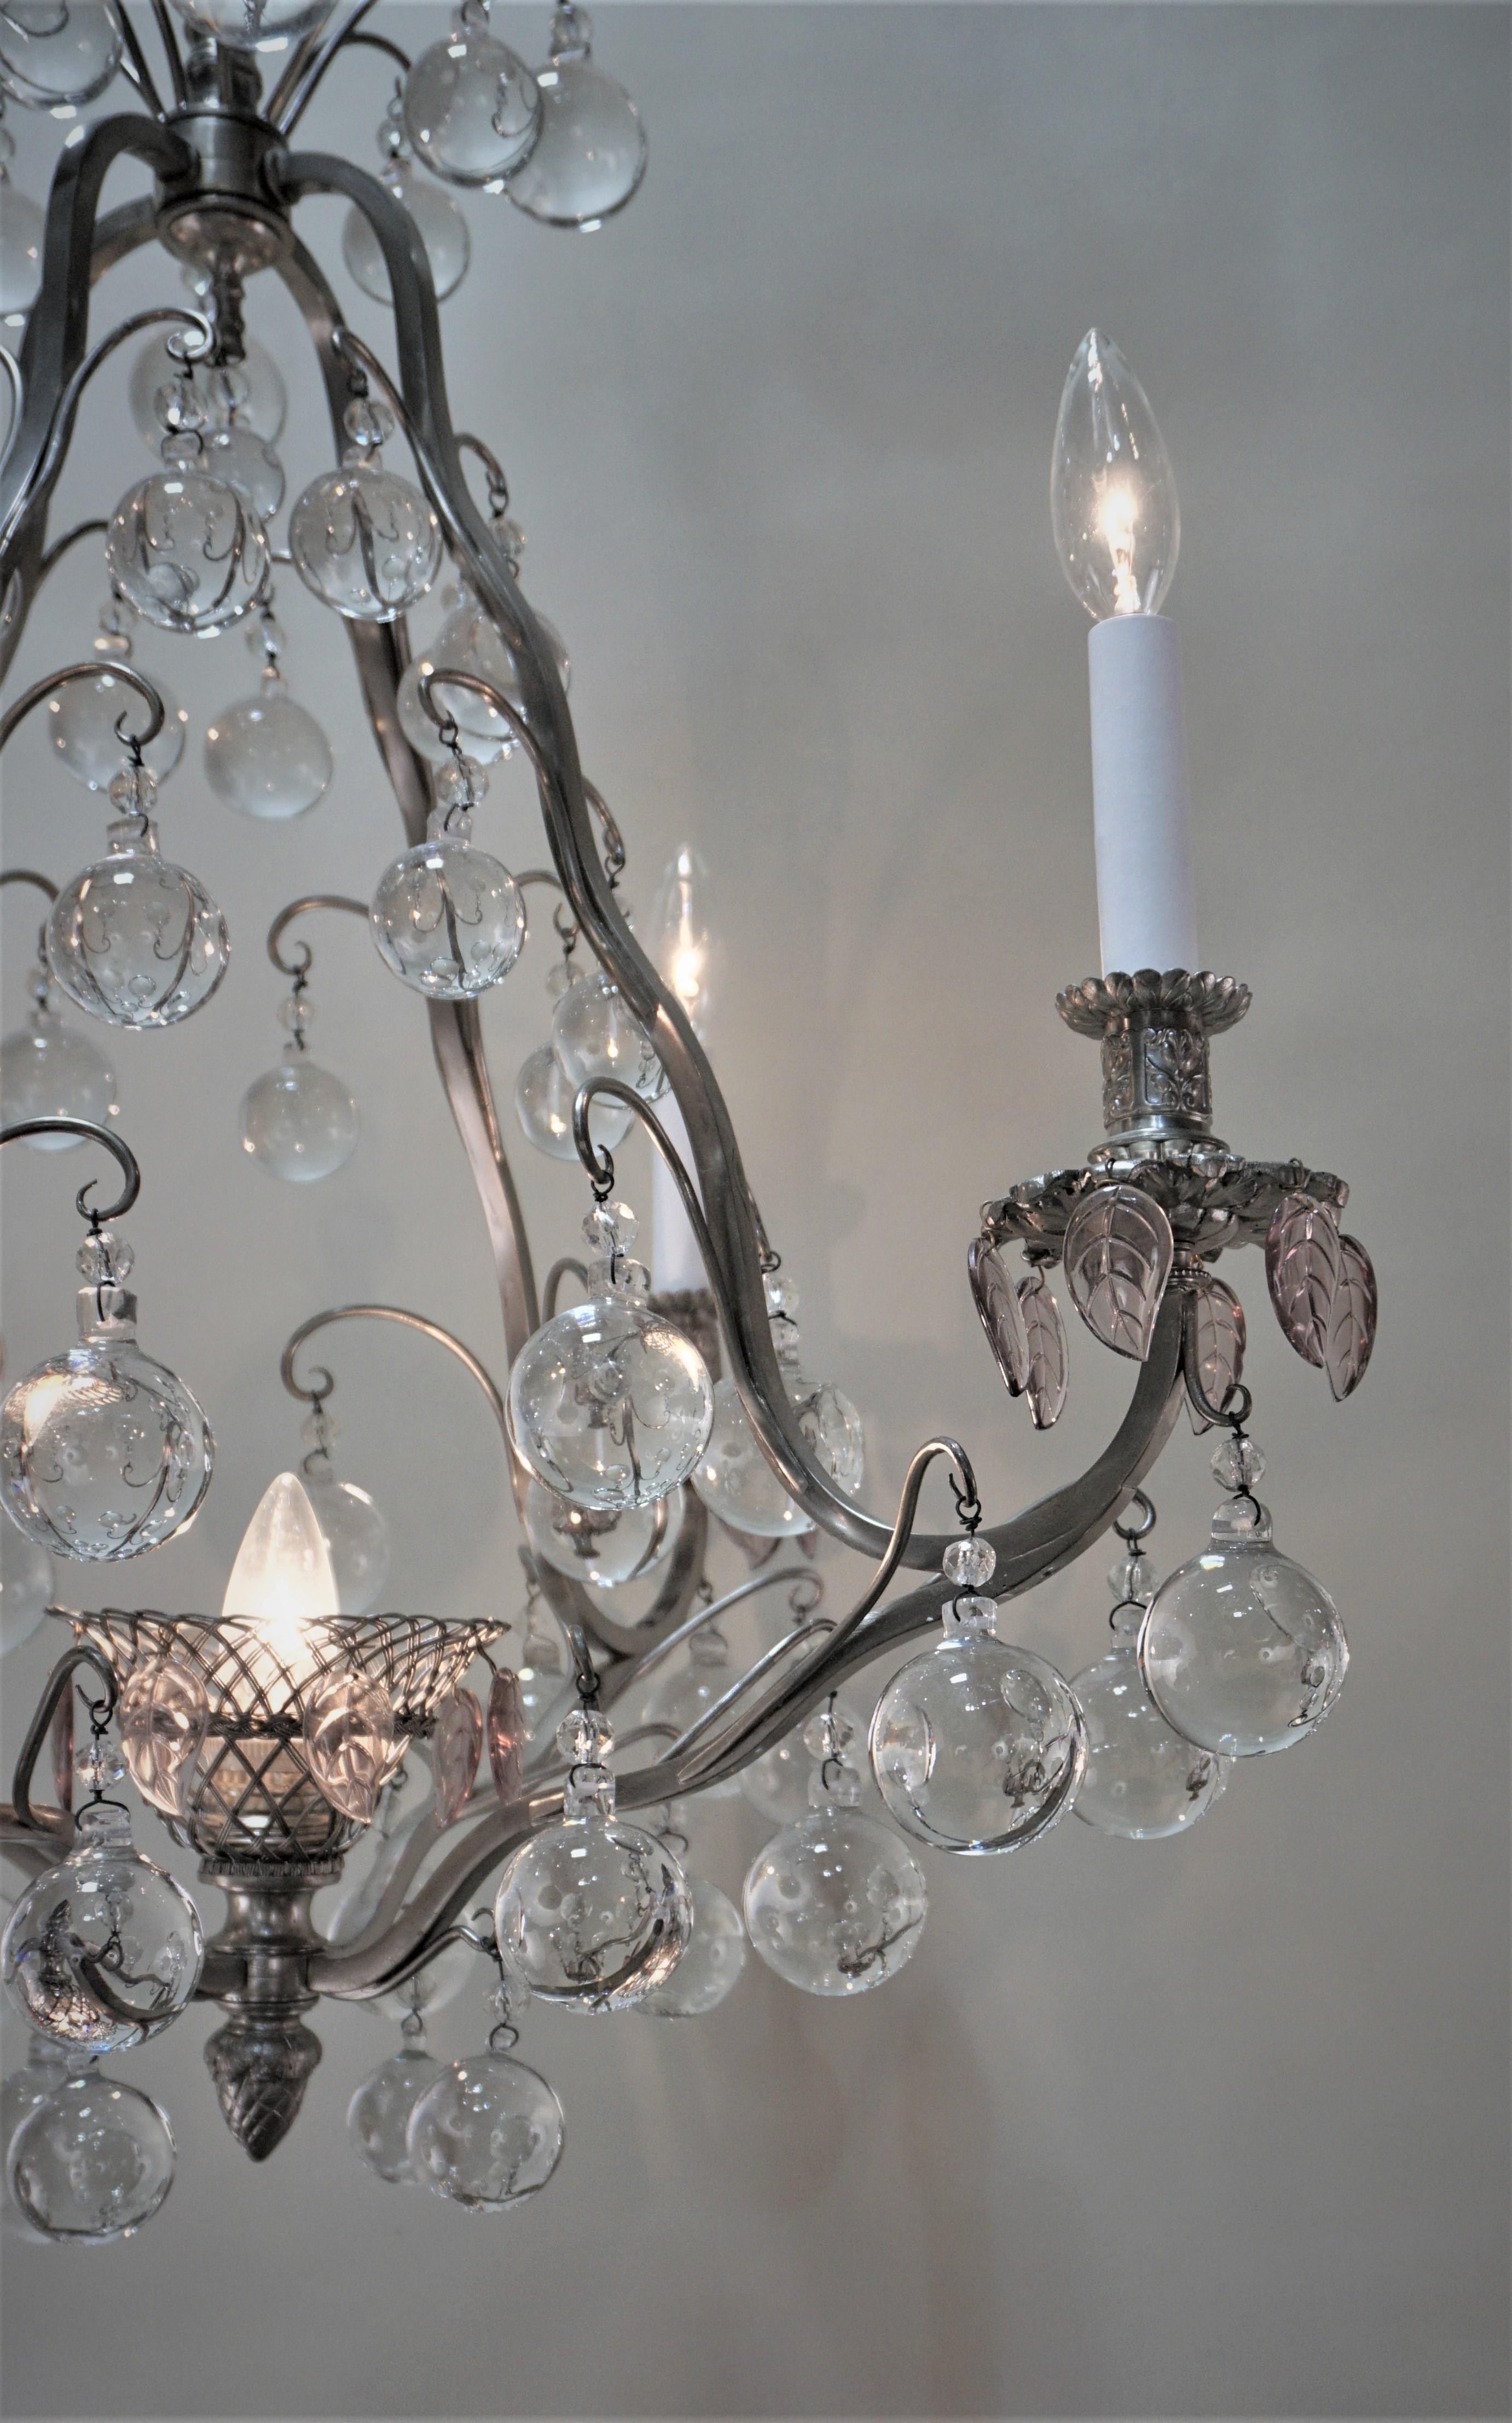 Satin soft oxidized silver on bronze with crystal balls chandelier.
Minimum height fully installed 32